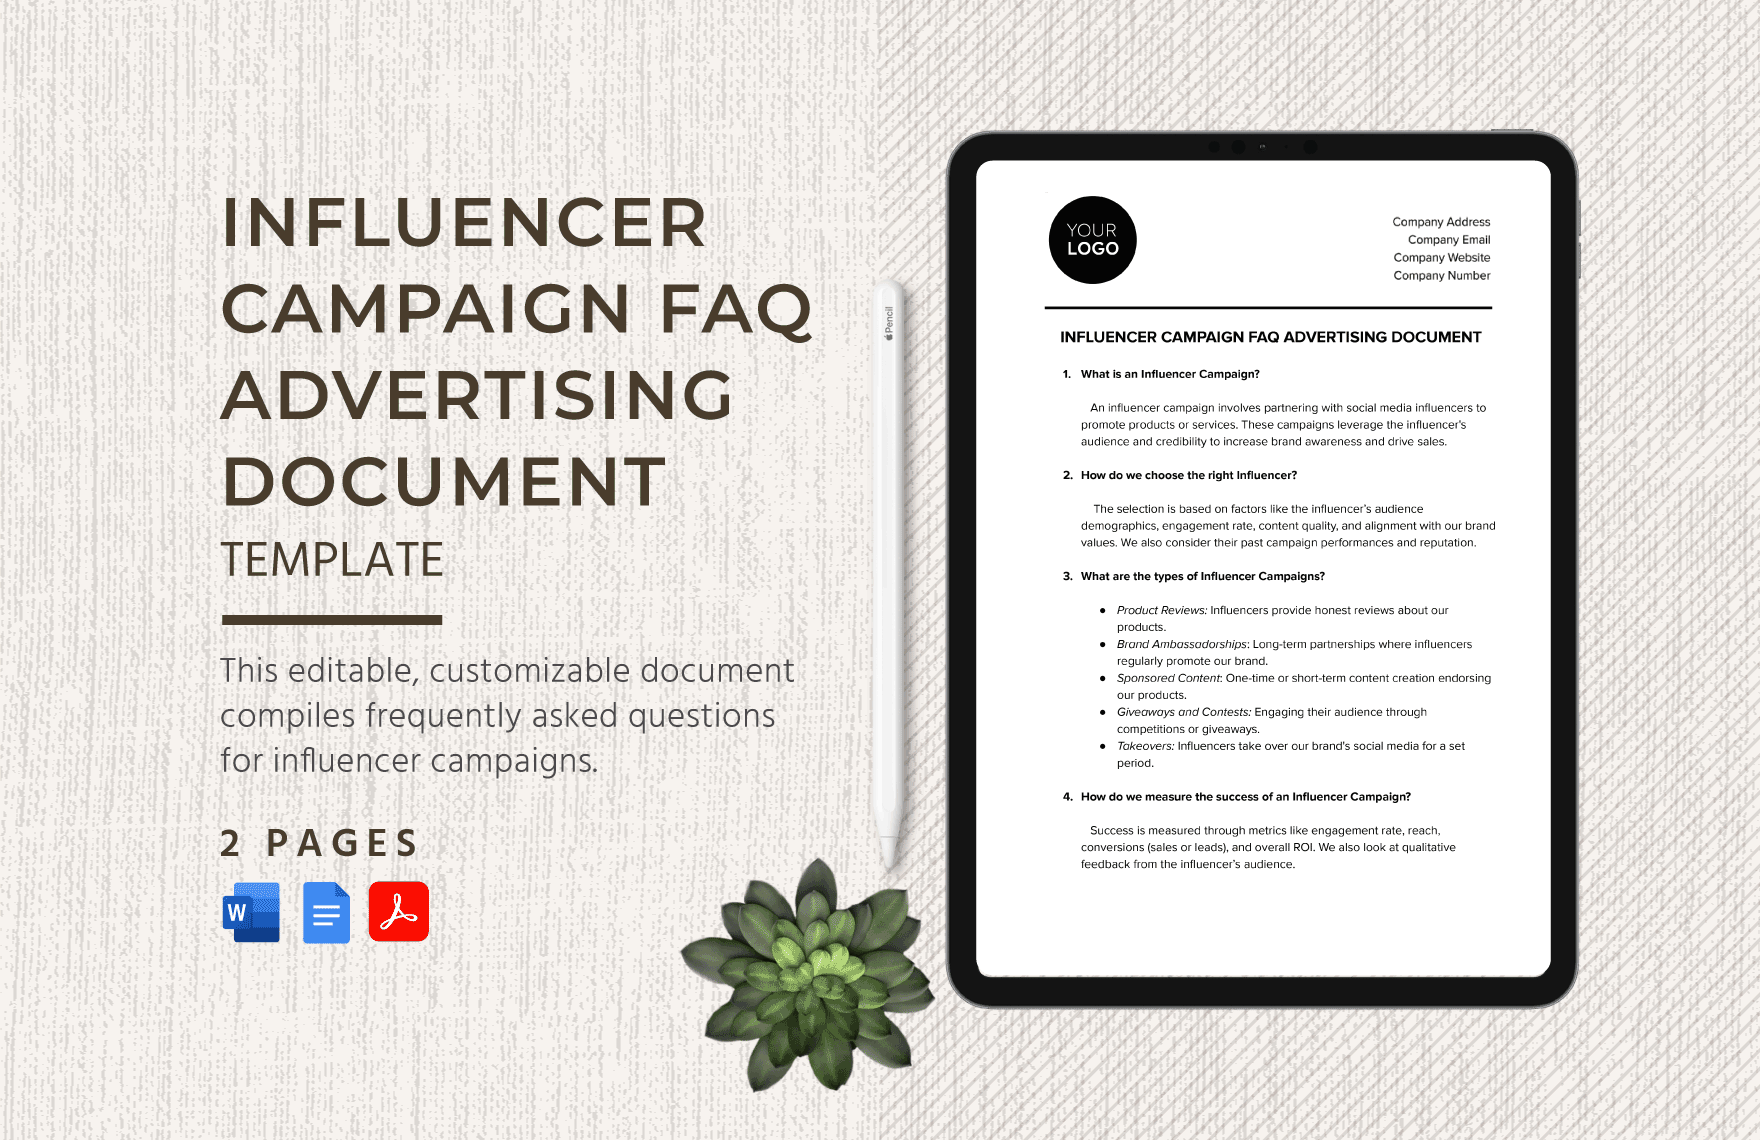 Influencer Campaign FAQ Advertising Document Template in Word, Google Docs, PDF